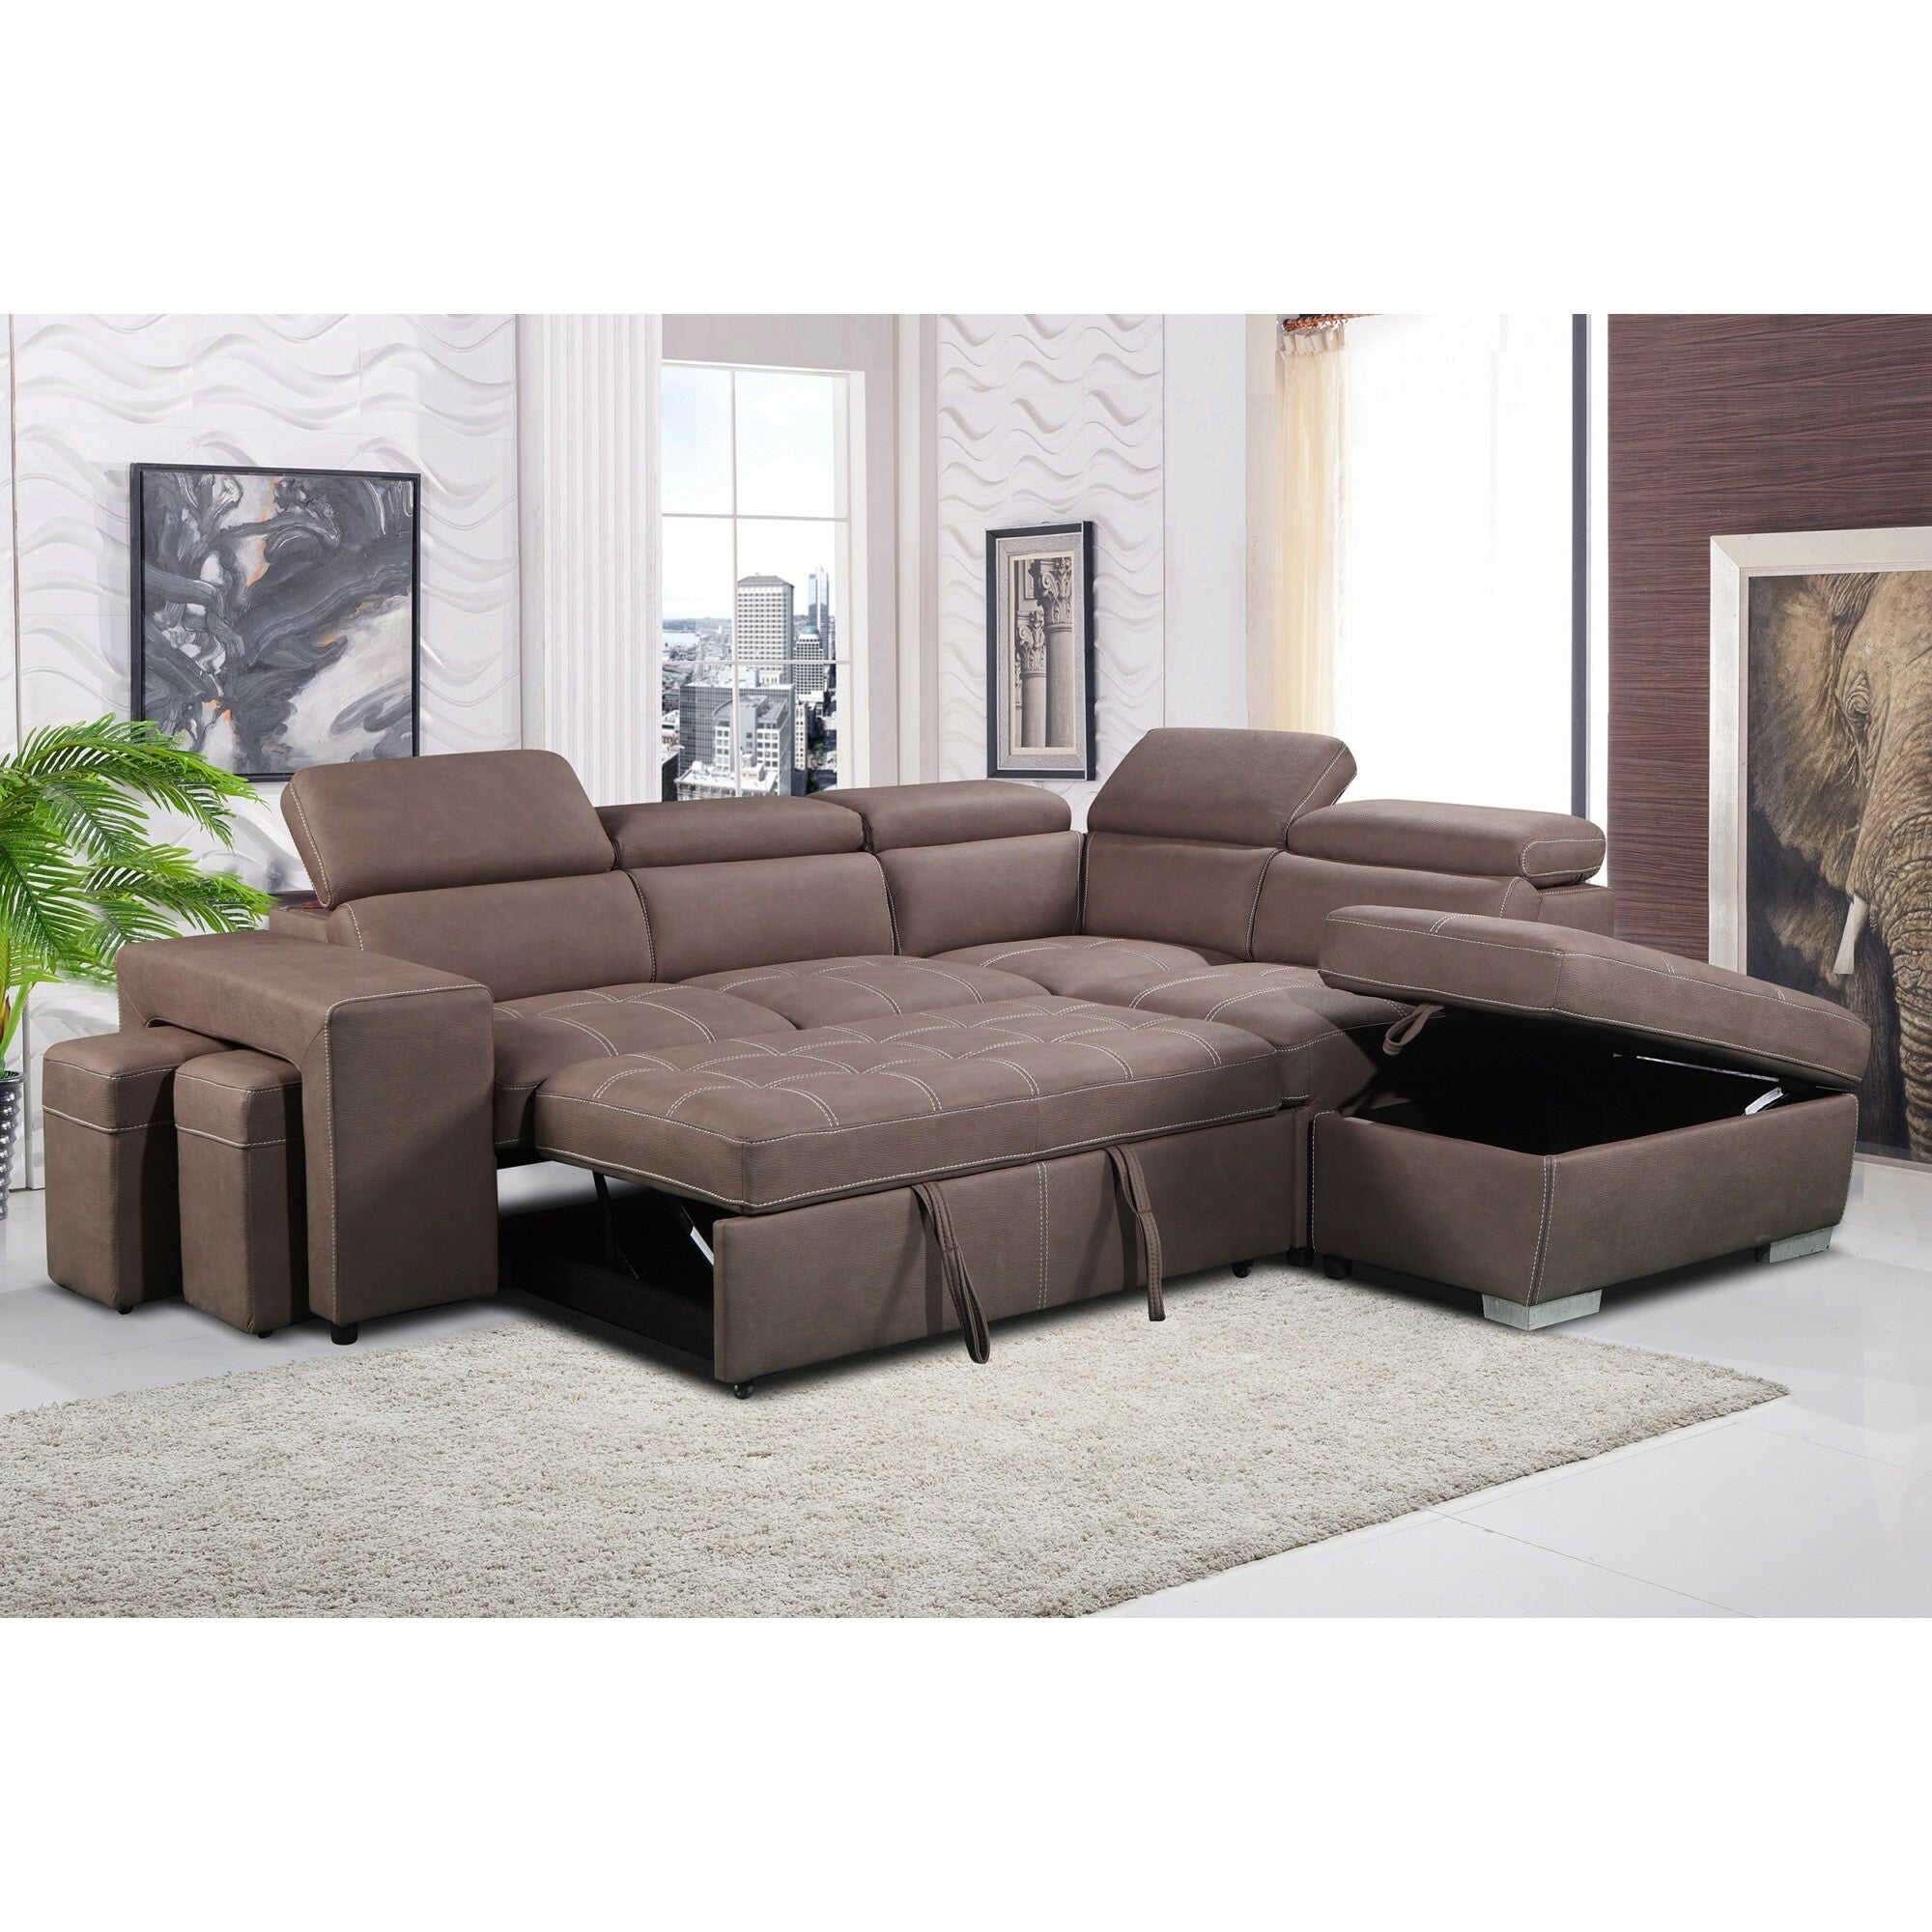 Peoria Fabric Corner Sofa / Pull Out Sofa Bed, 2 Seater with RHF Chaise & Ottomans